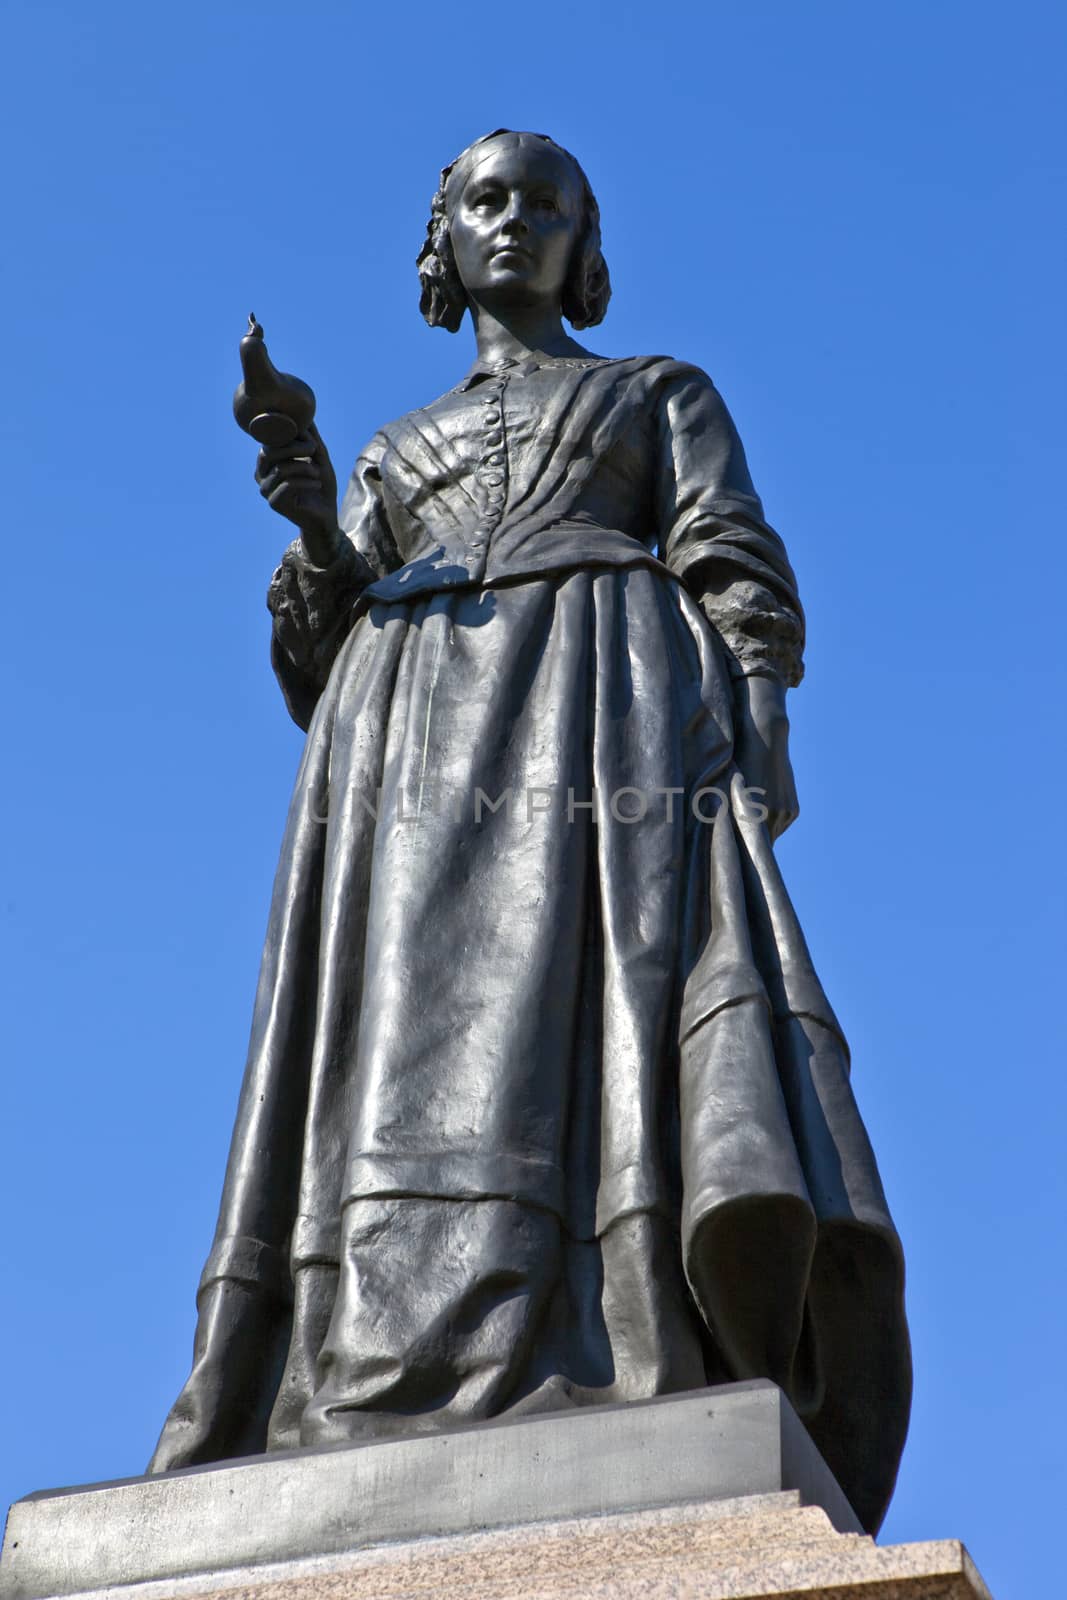 Statue of the famous nurse Florence Nightingale in London.